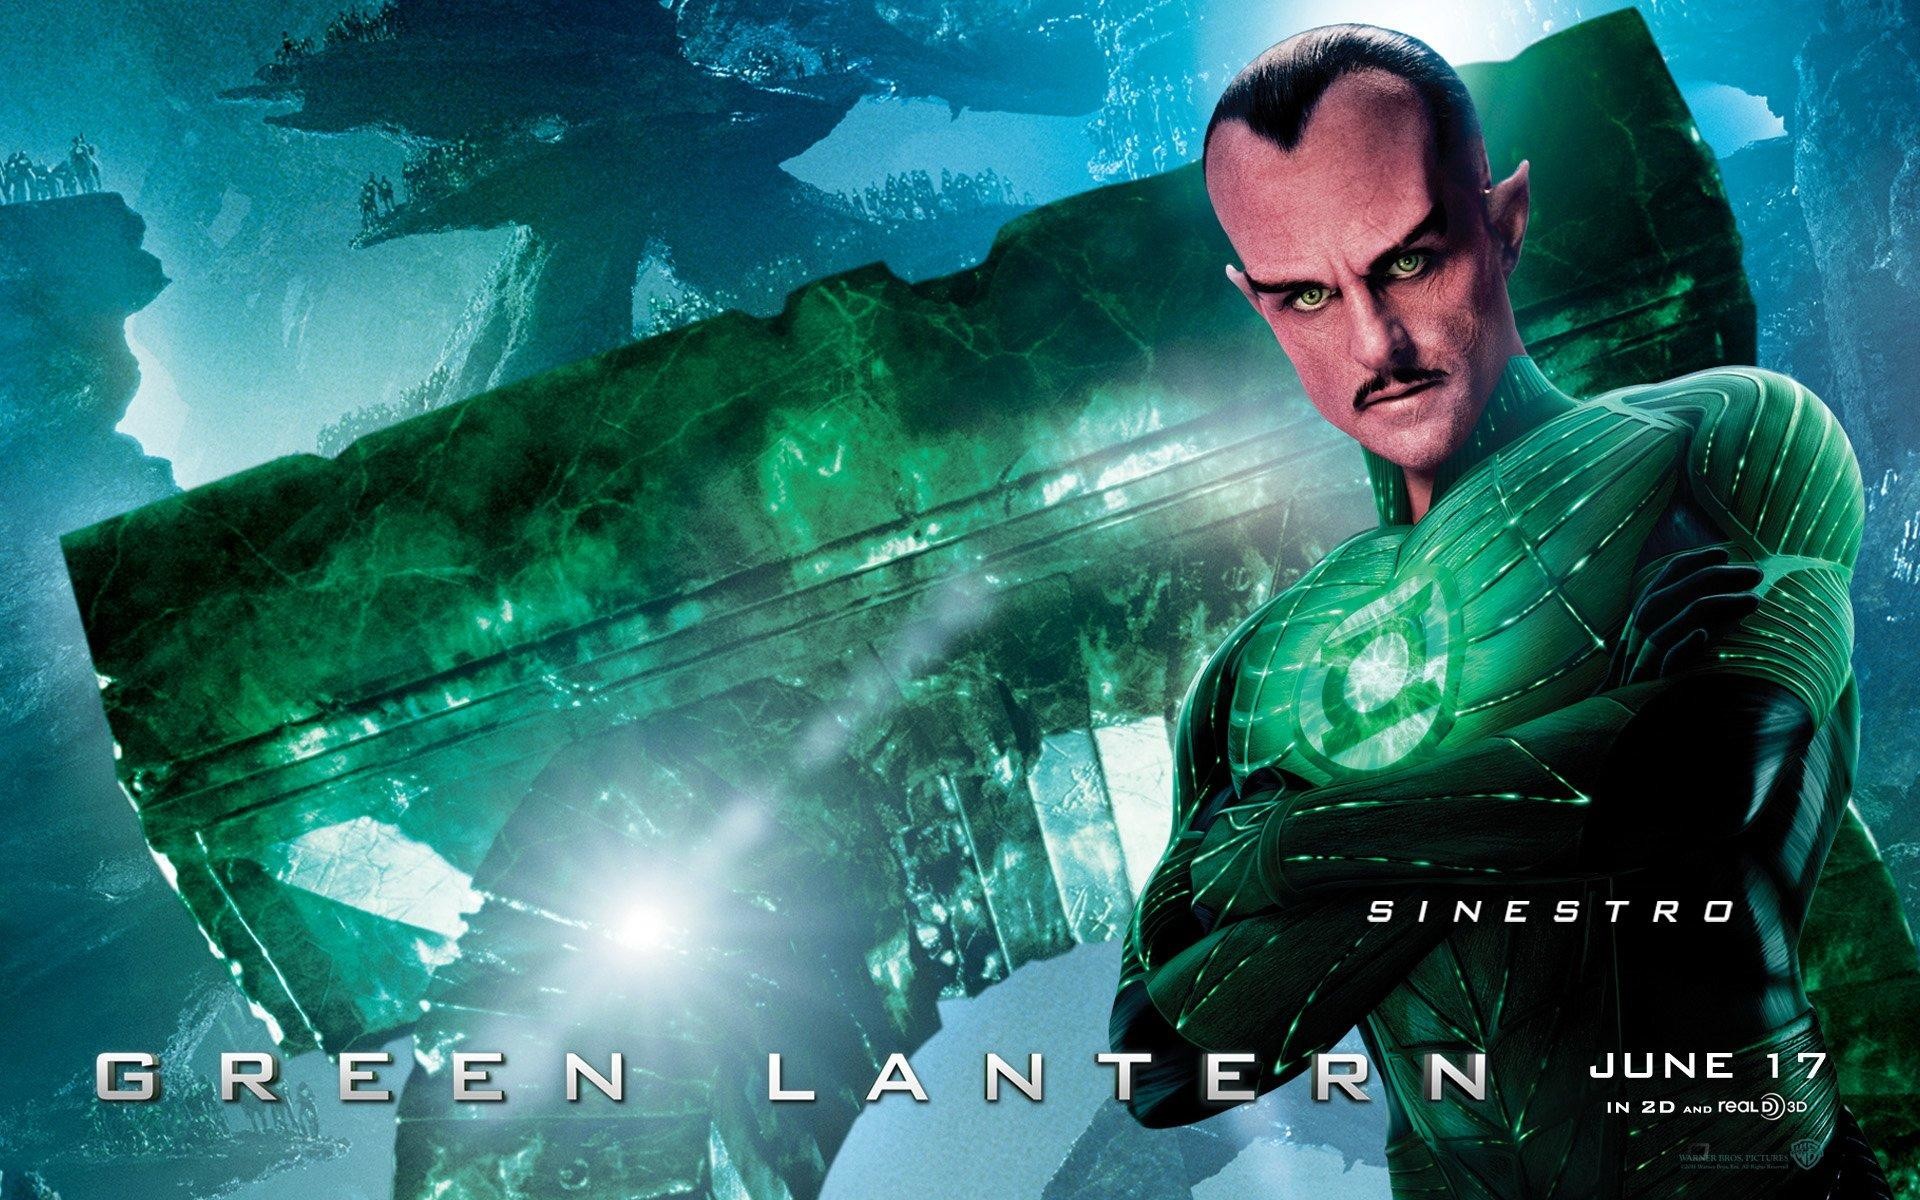 1920x1200 Green Lantern: Sinestro wallpapers and stock photos